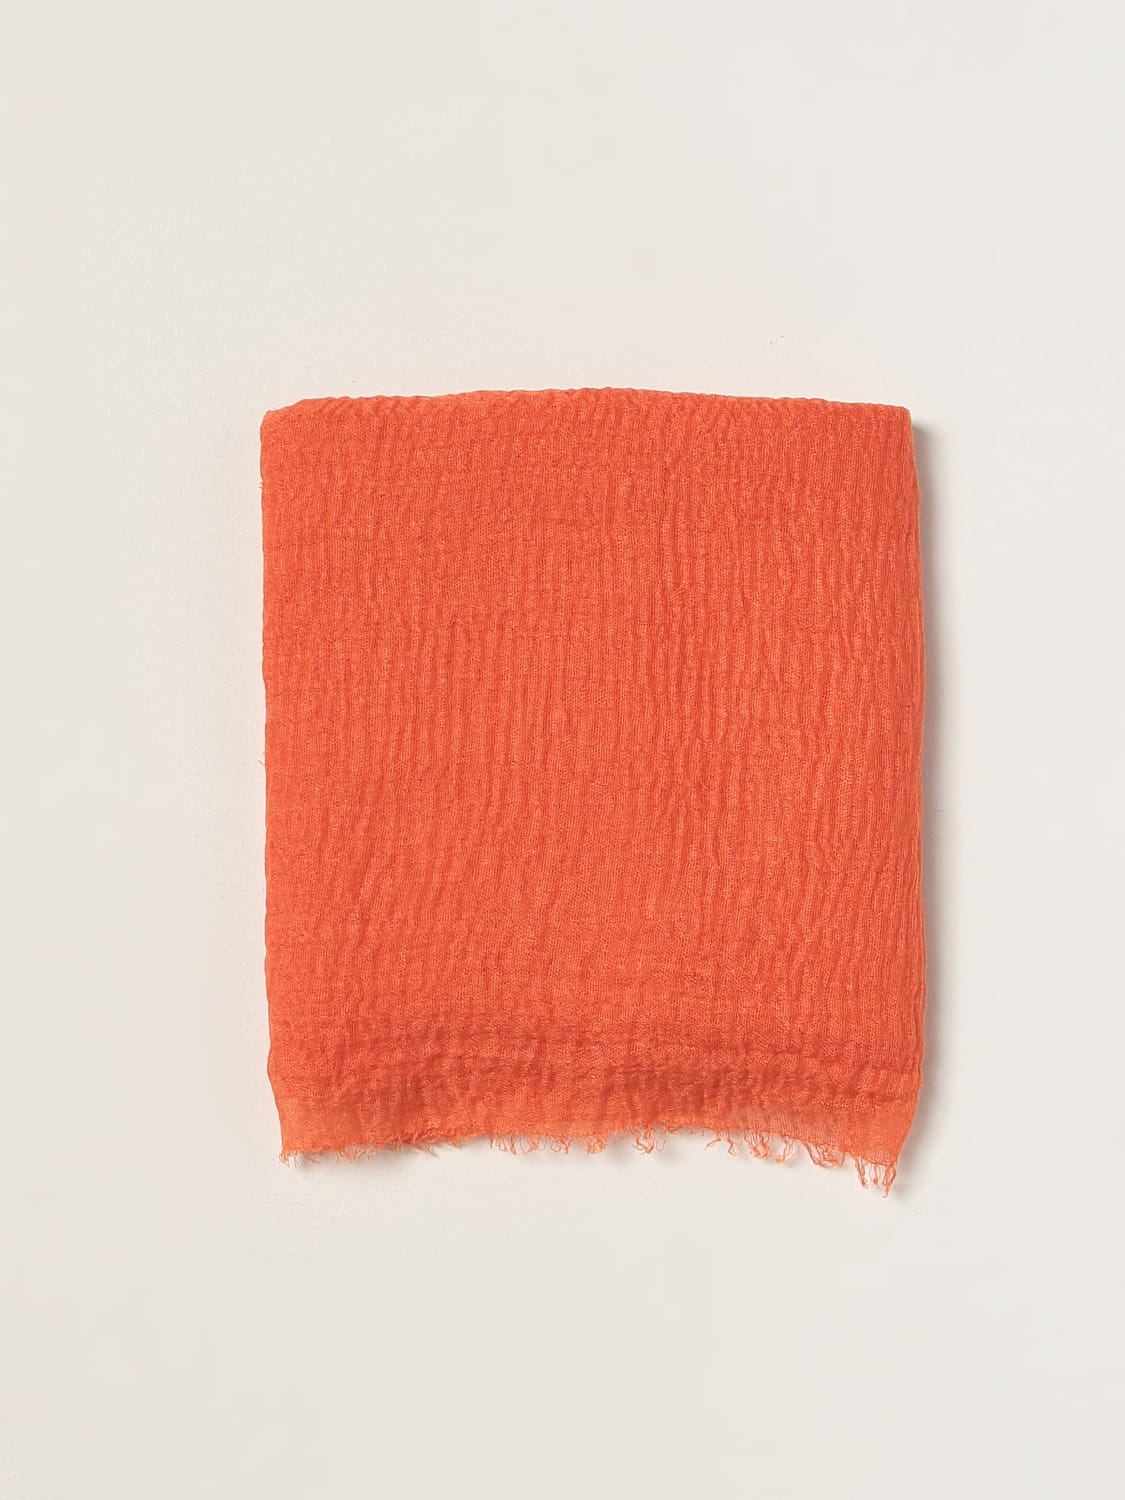 Kaos Outlet: scarf for woman - Orange | Kaos scarf PPAZM001 online at